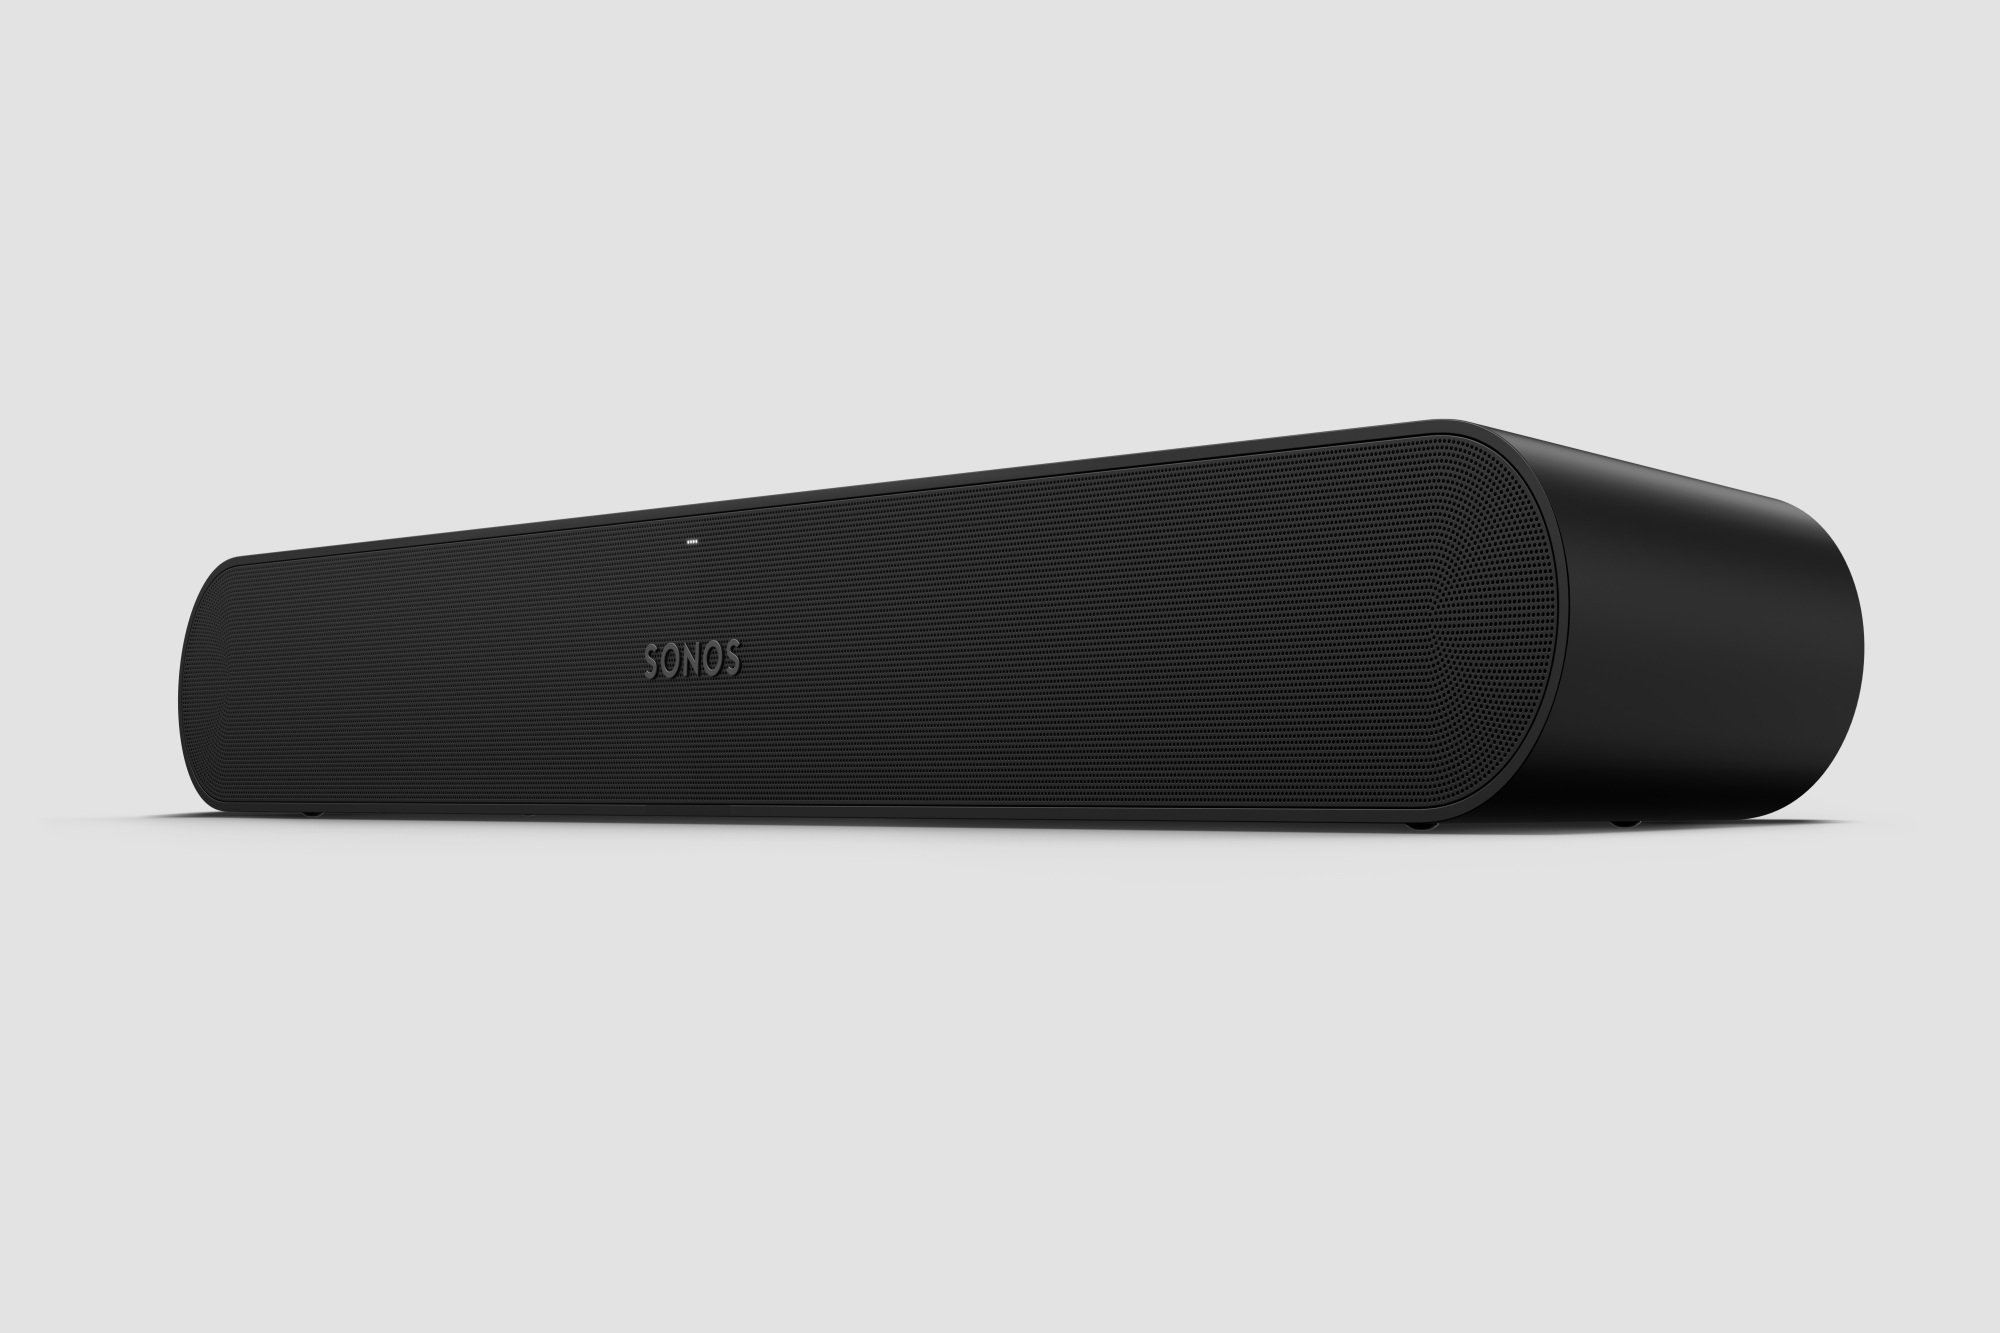 The Sonos Ray in black.